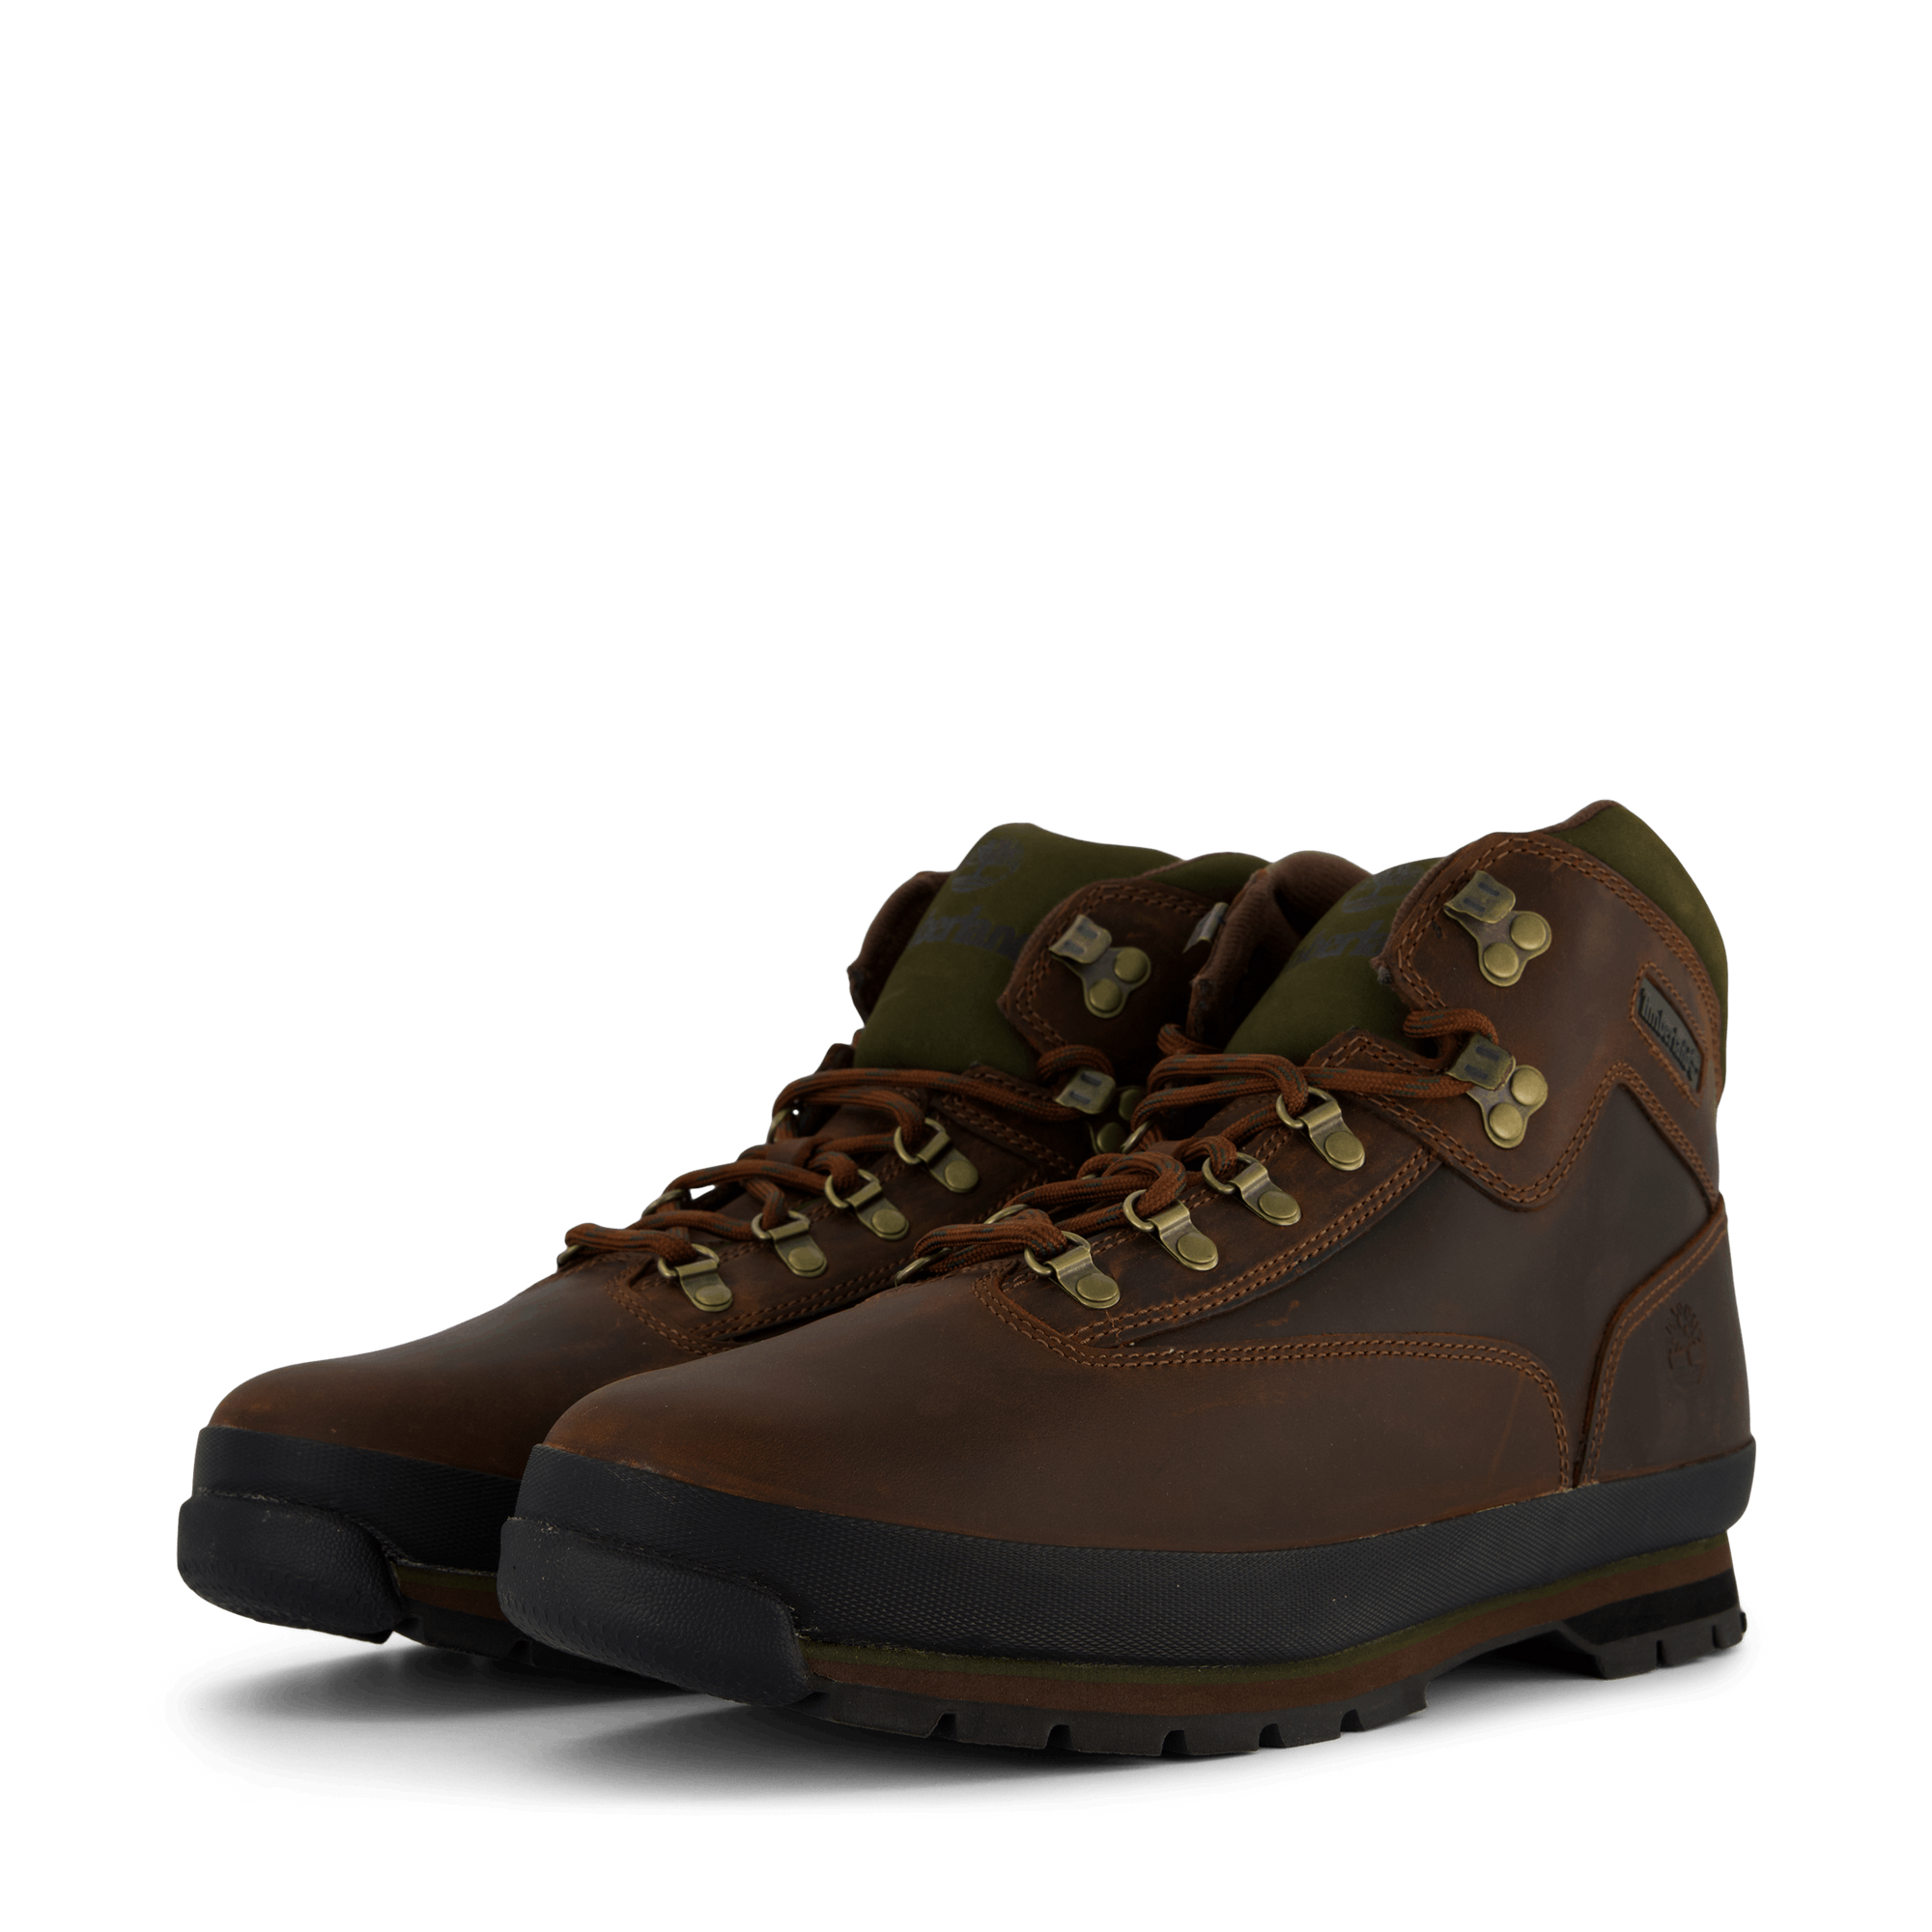 Euro Hiker Leather Brown